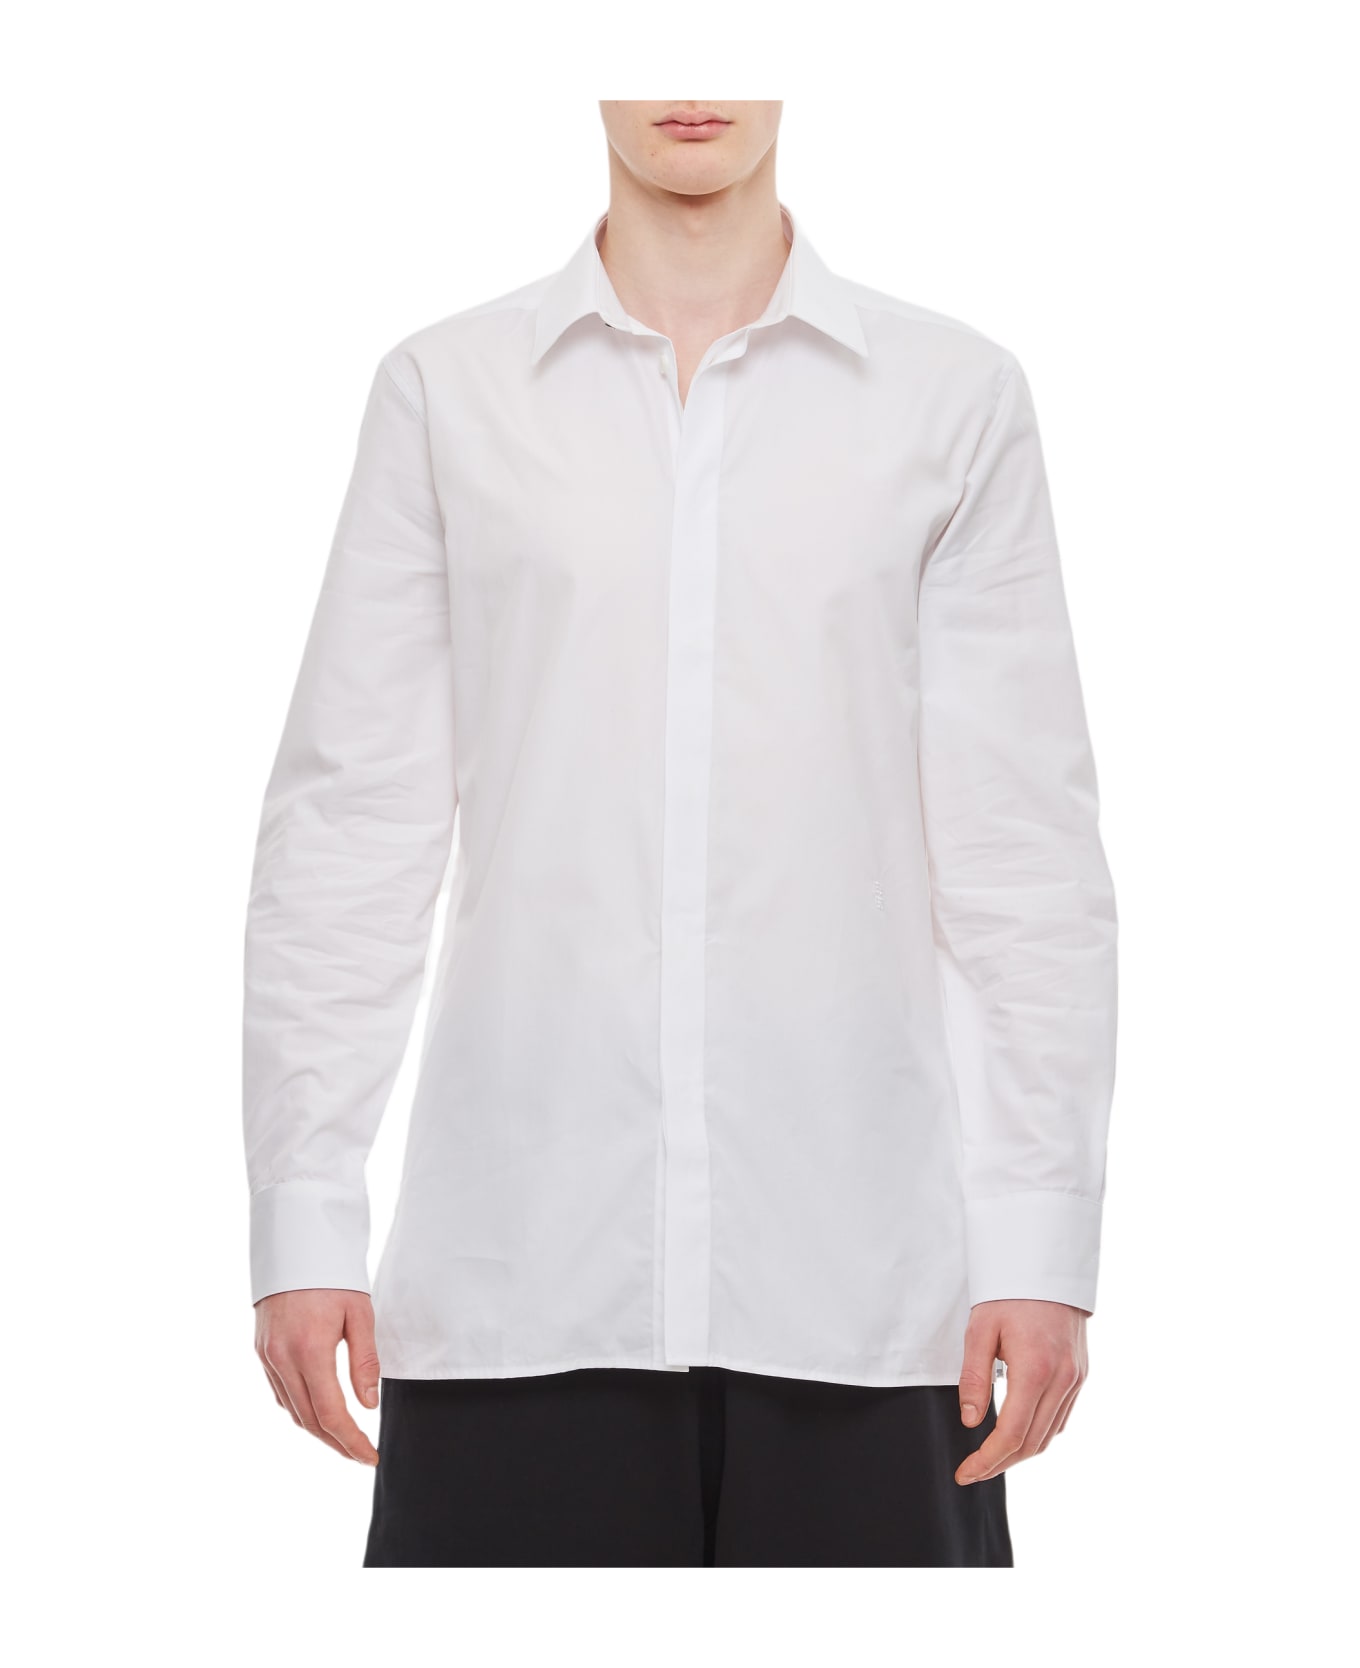 Givenchy 4g Embroidered Poplin Shirt - White